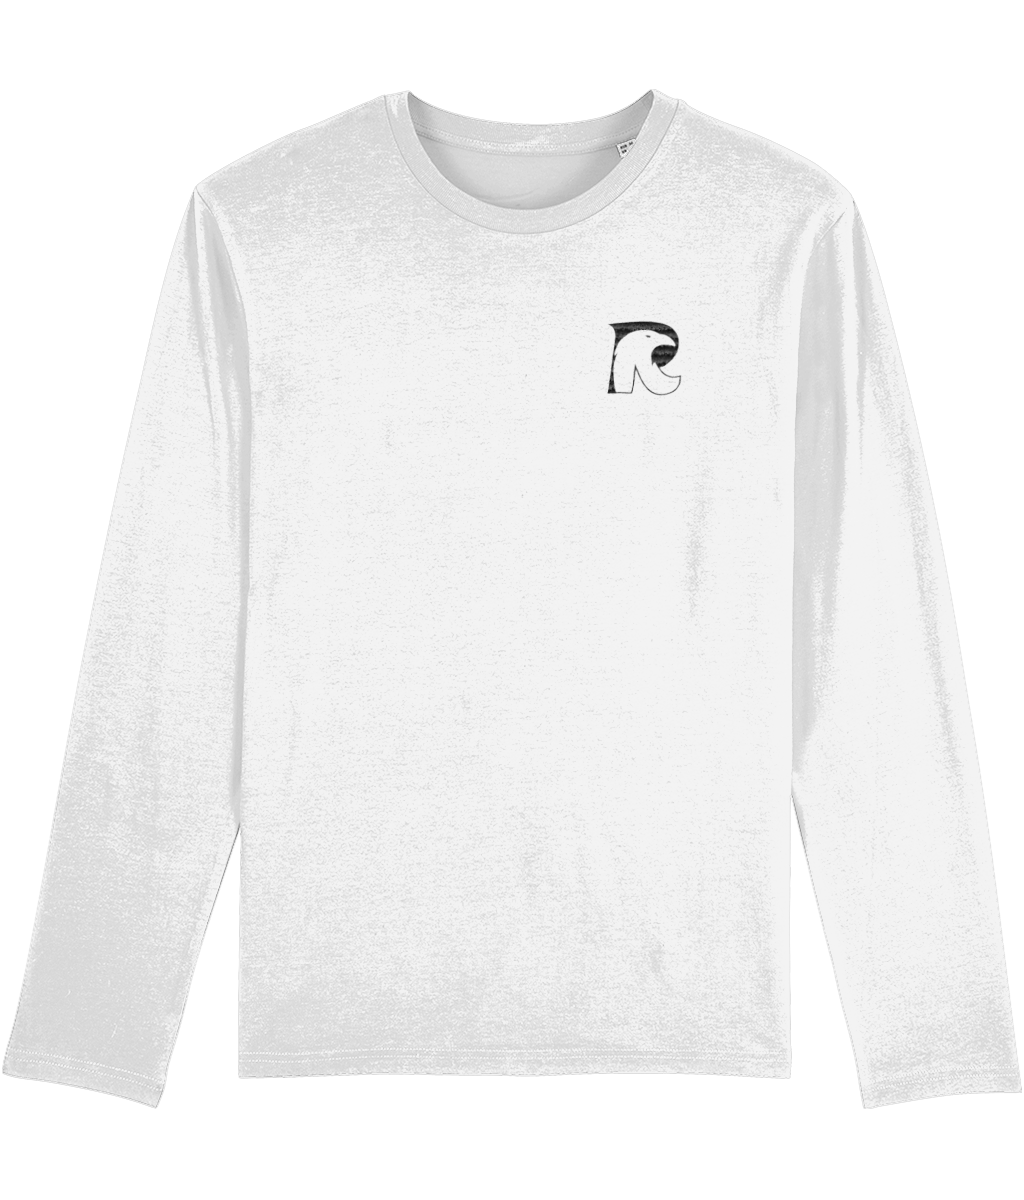 Rob Raven Embroidered Long Sleeve T-Shirt